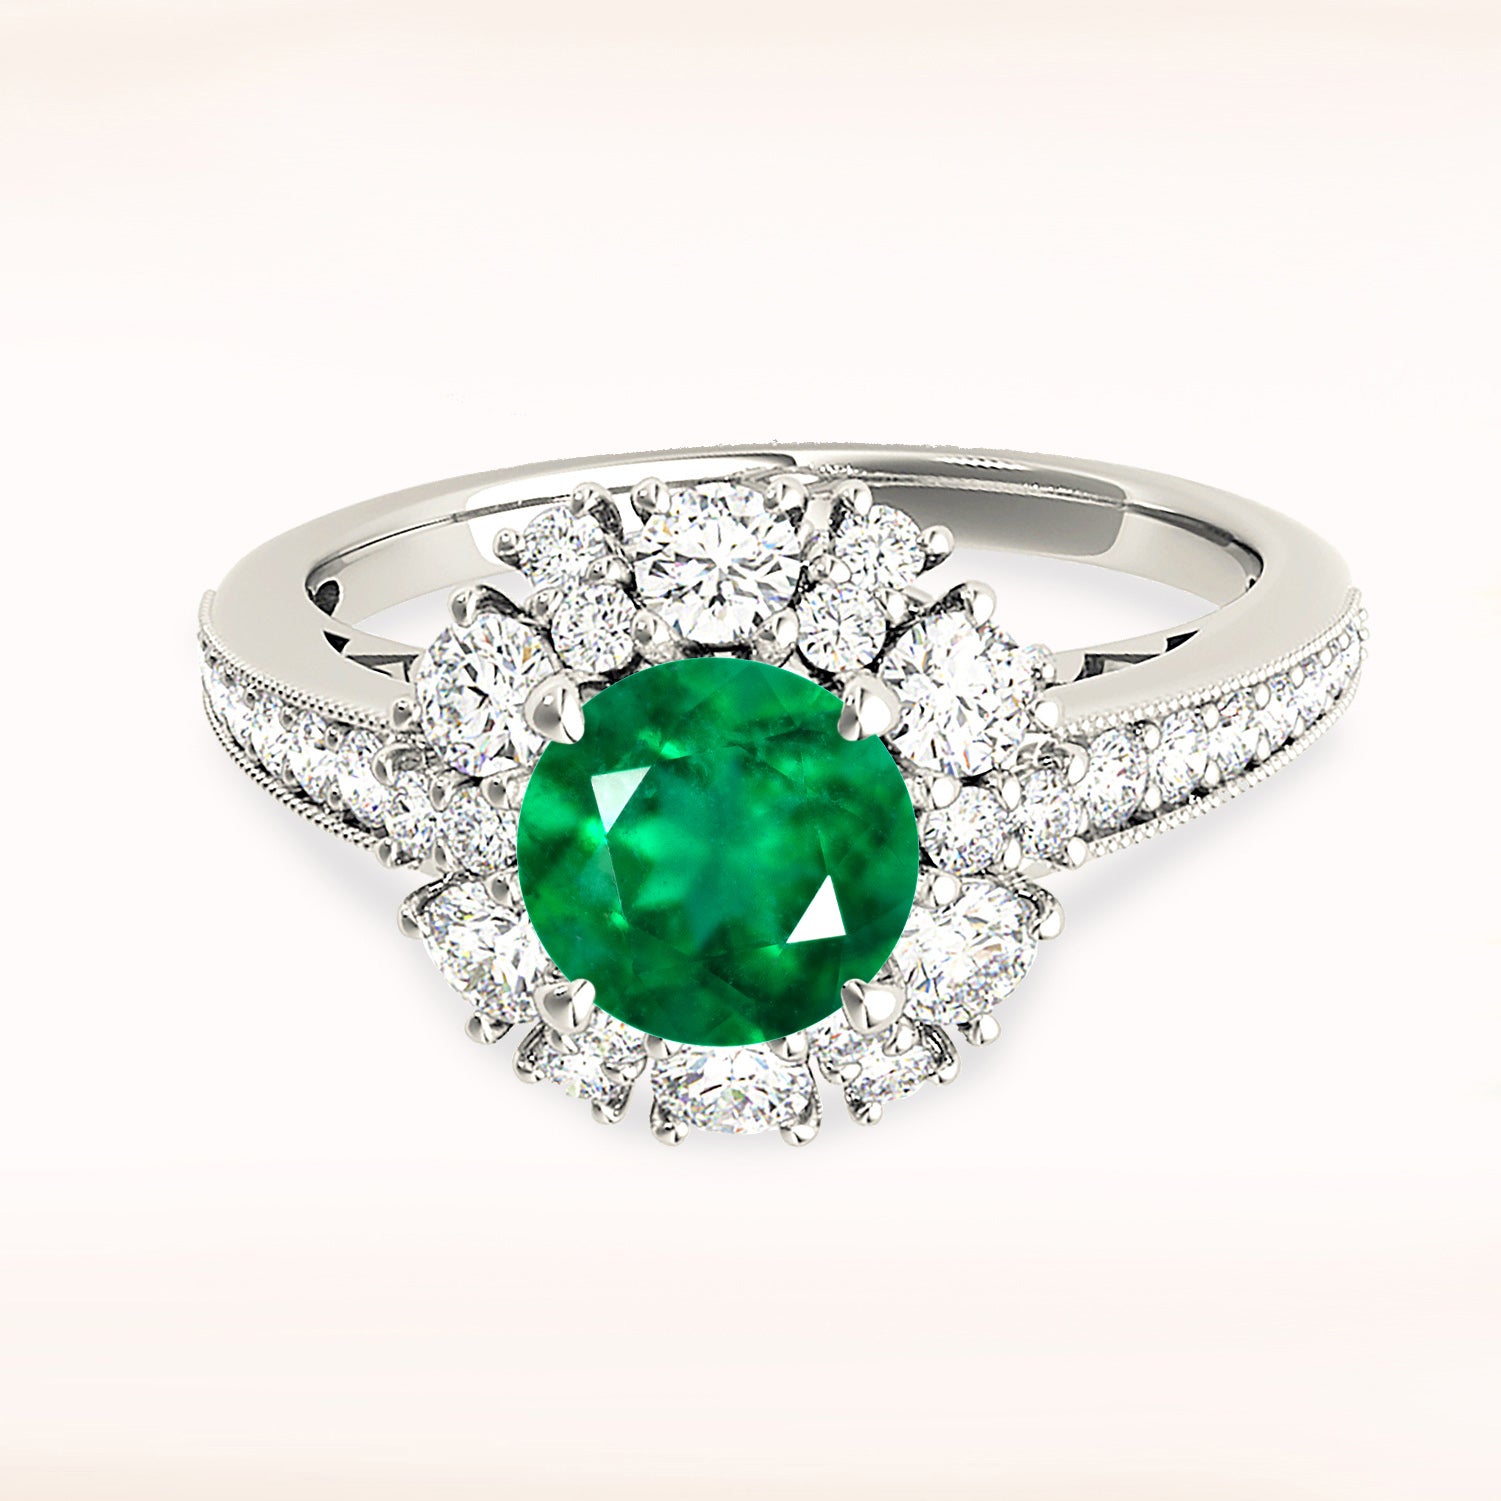 1.75 ct. Genuine Emerald Ring With 1.00 ctw. Diamond Halo and Floral Basket-in 14K/18K White, Yellow, Rose Gold and Platinum - Christmas Jewelry Gift -VIRABYANI